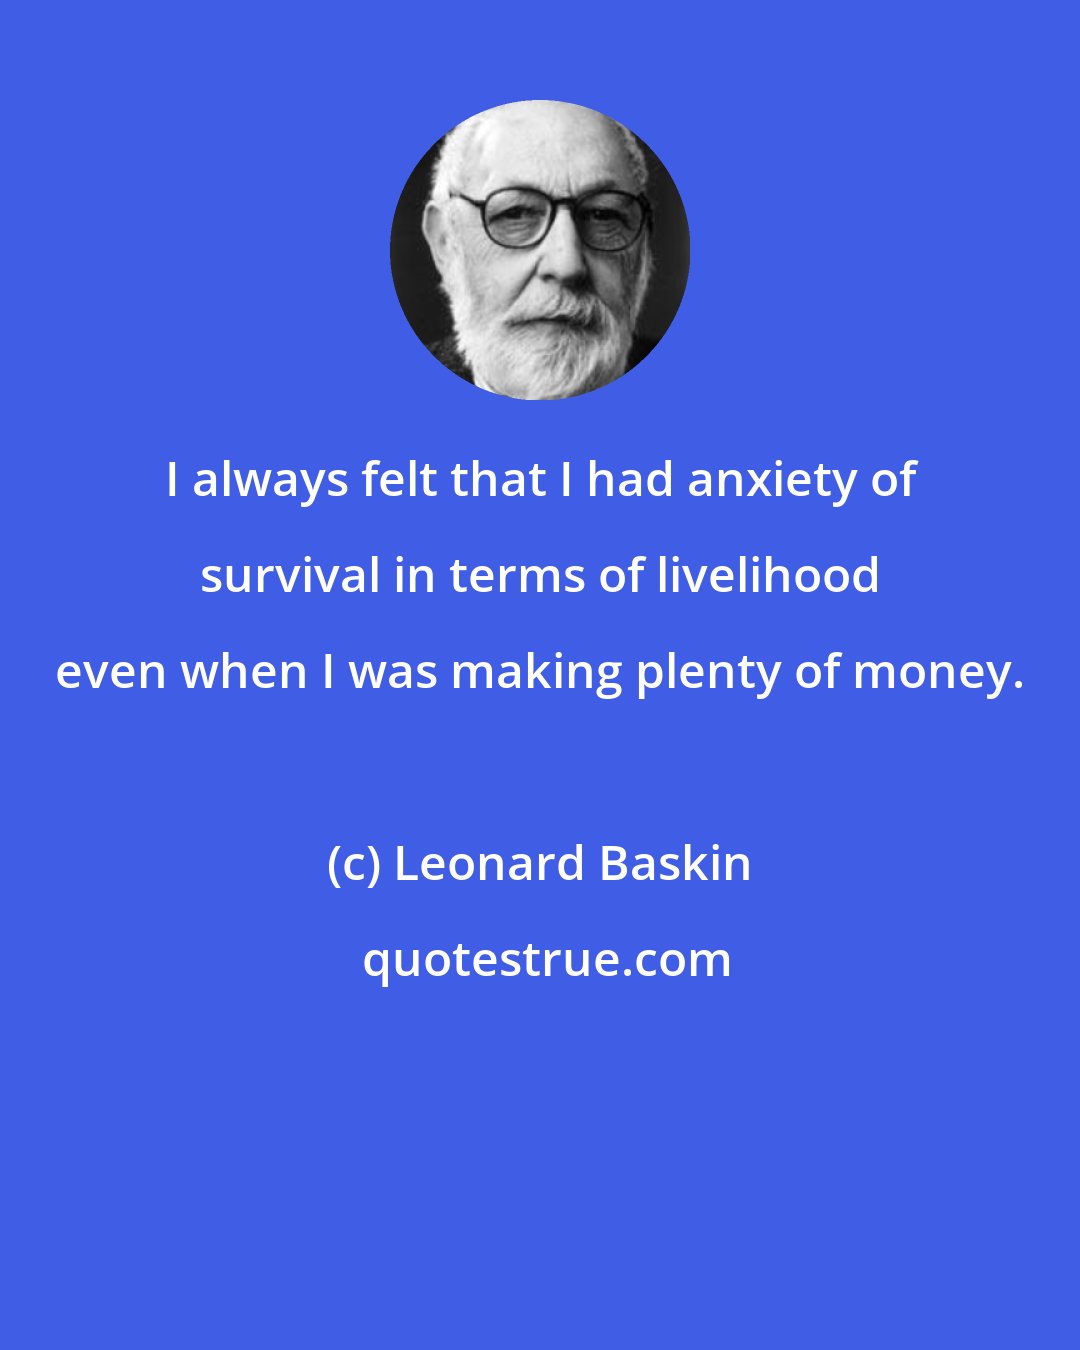 Leonard Baskin: I always felt that I had anxiety of survival in terms of livelihood even when I was making plenty of money.